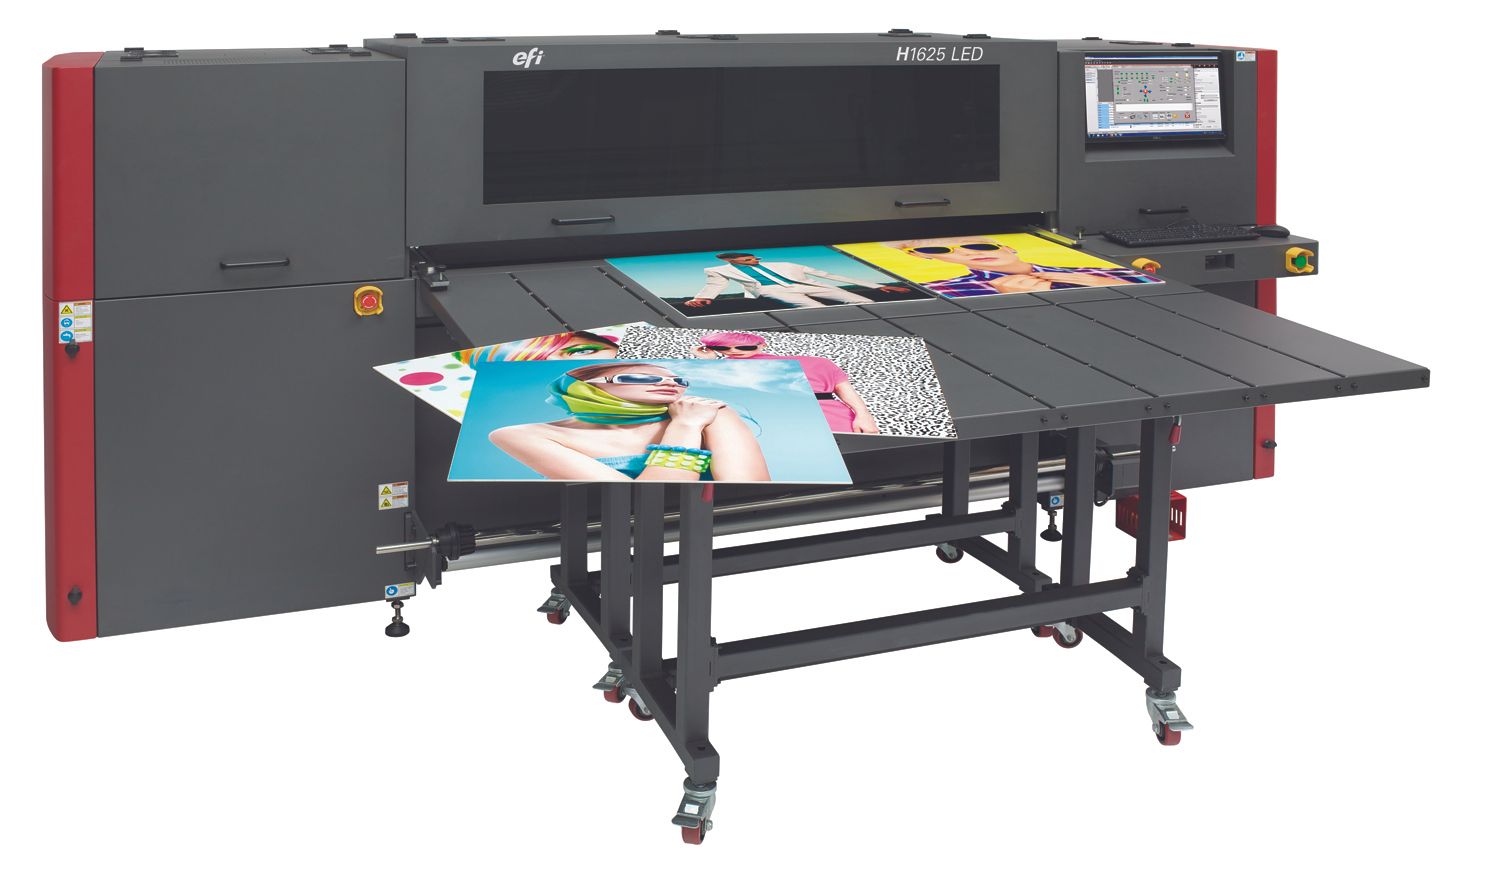 Quality printing on all rigid materials